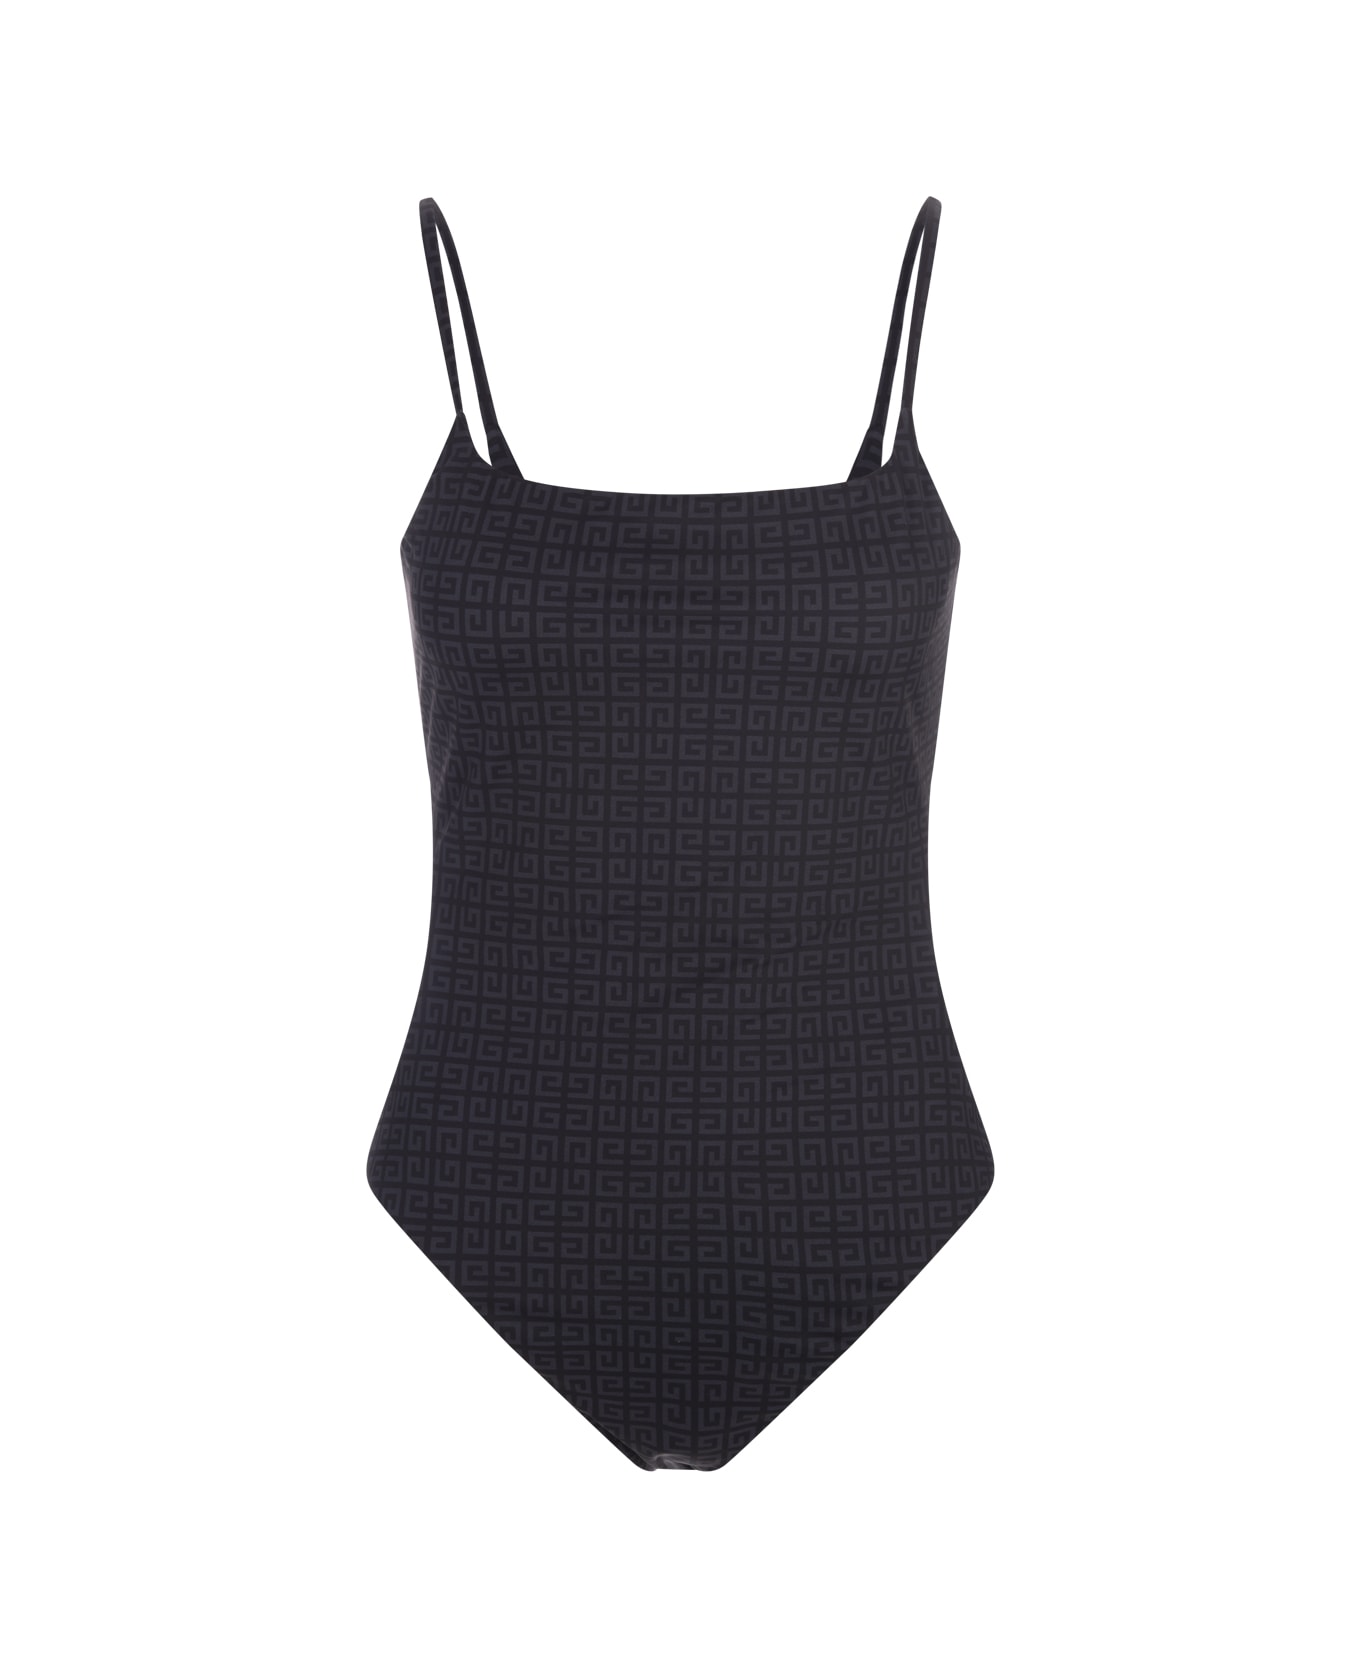 Givenchy Black One Piece Swimsuit In 4g Recycled Nylon - Black ワンピース